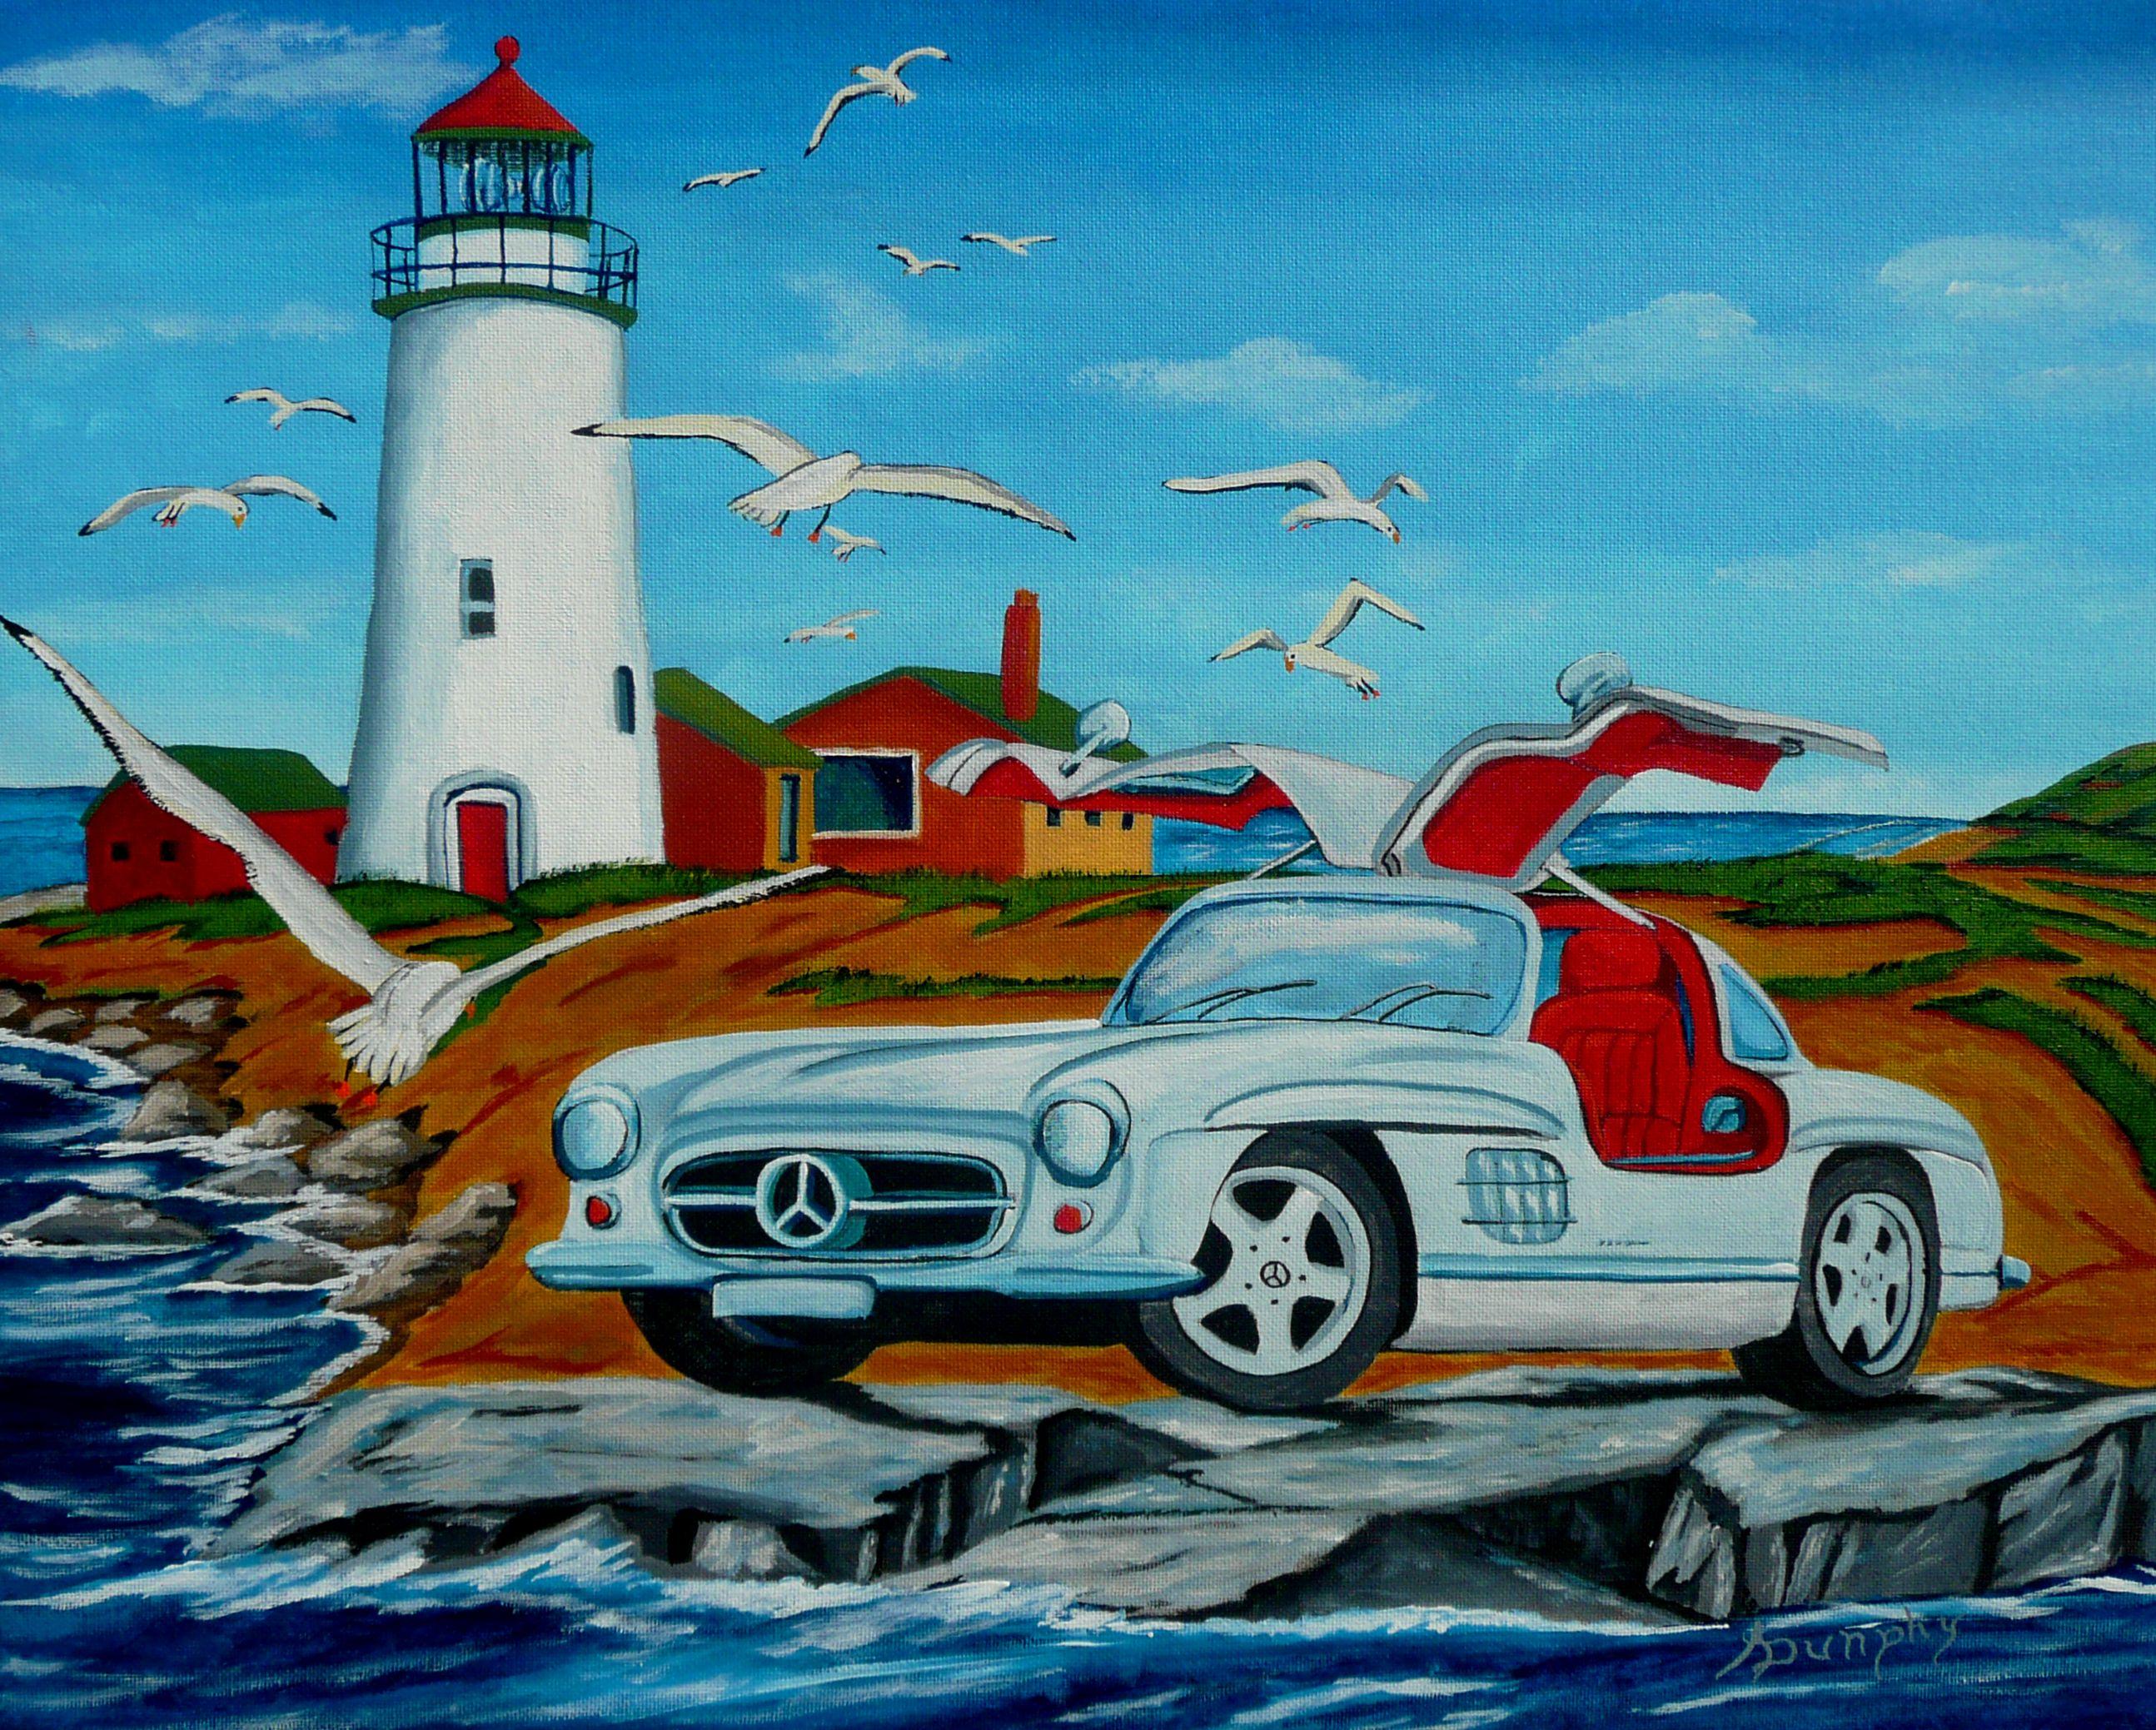 This is a whimsical piece based on a word play whereupon the classic 1954 Mercedes Benz has "Gullwing" door. The car appears ready to take to the skies and join the flock.  This painting has been created using professional grade acrylics on